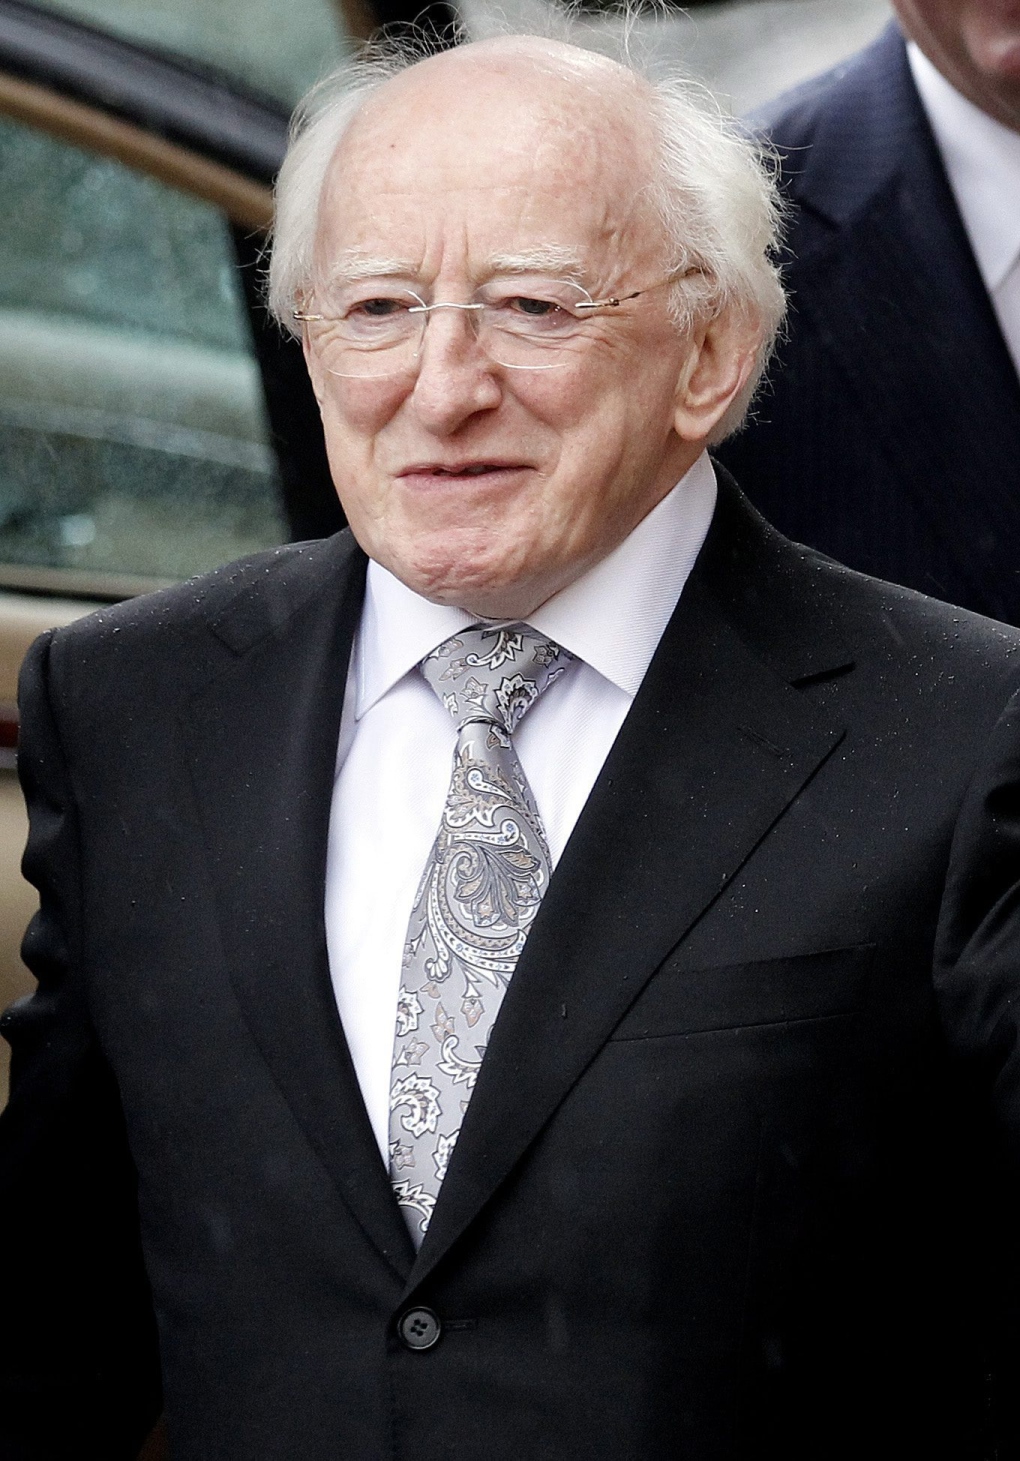 Michael D Higgins arrives for his inauguration 